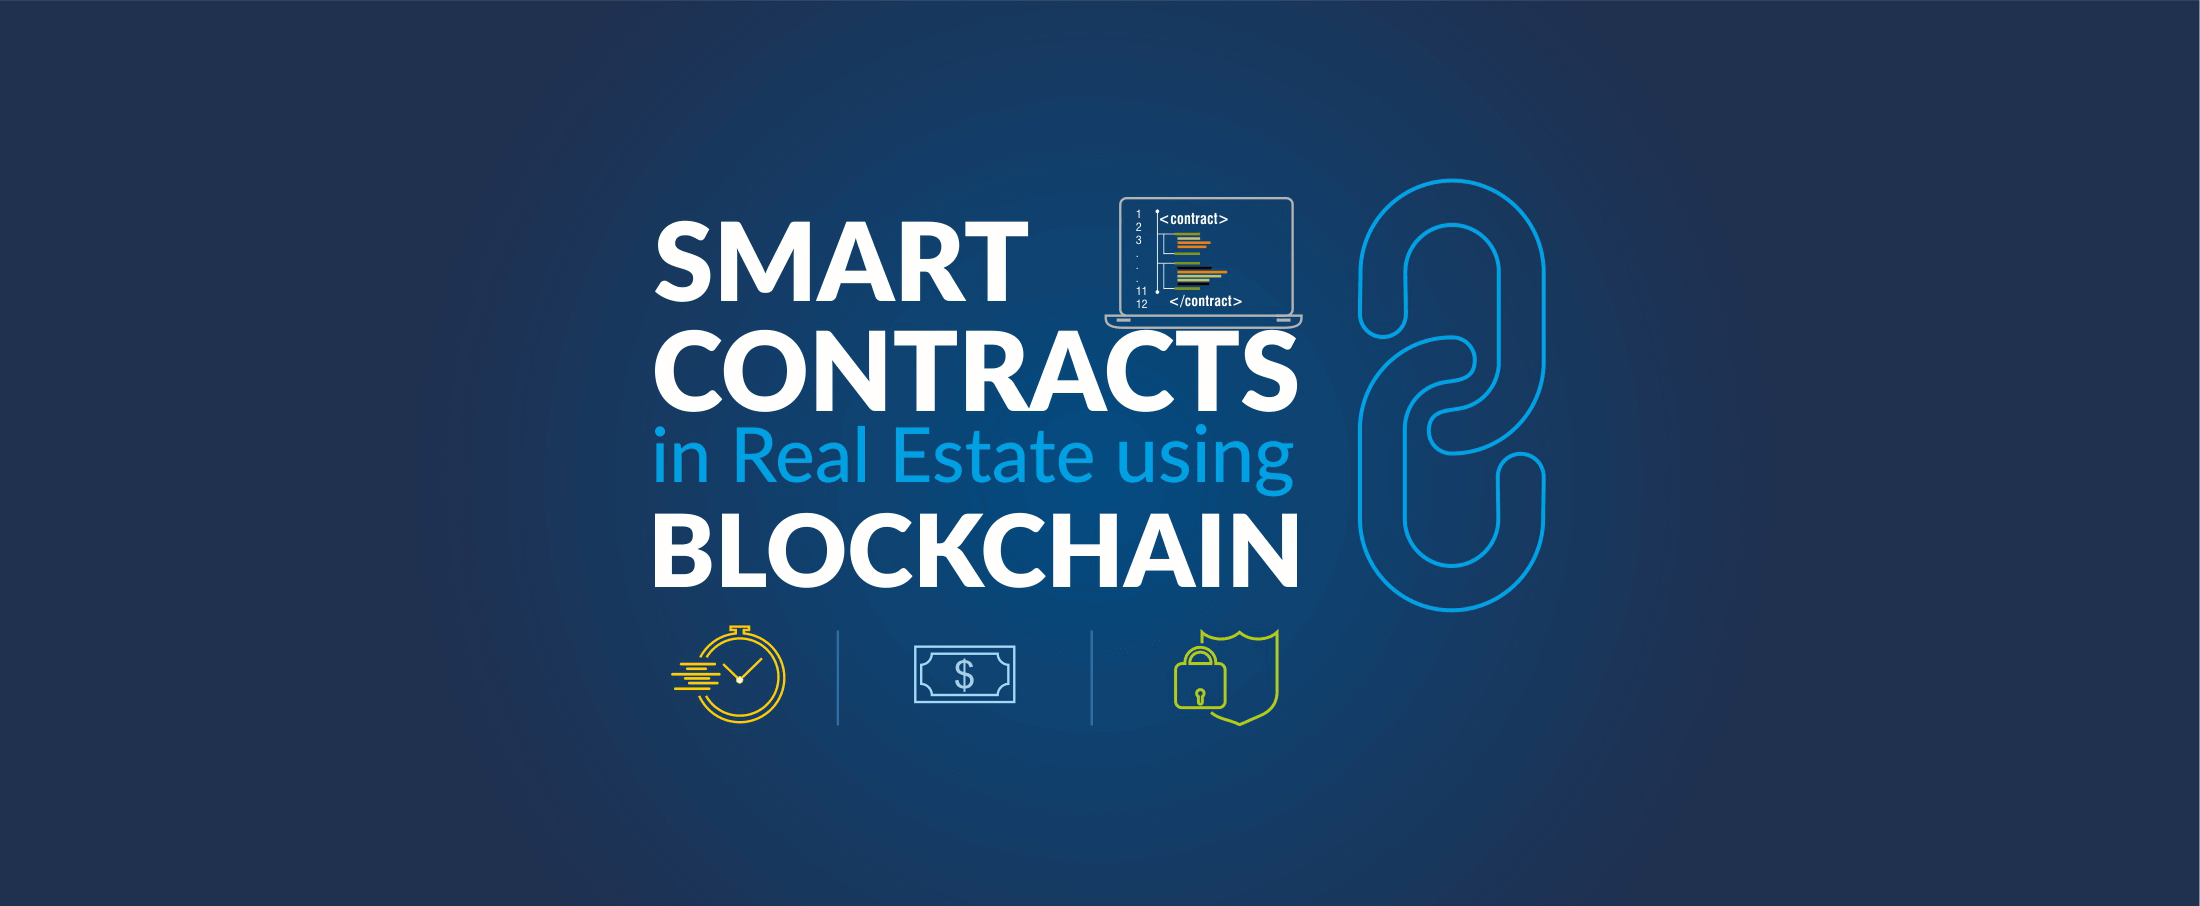 Smart Contracts in Real Estate using Blockchain